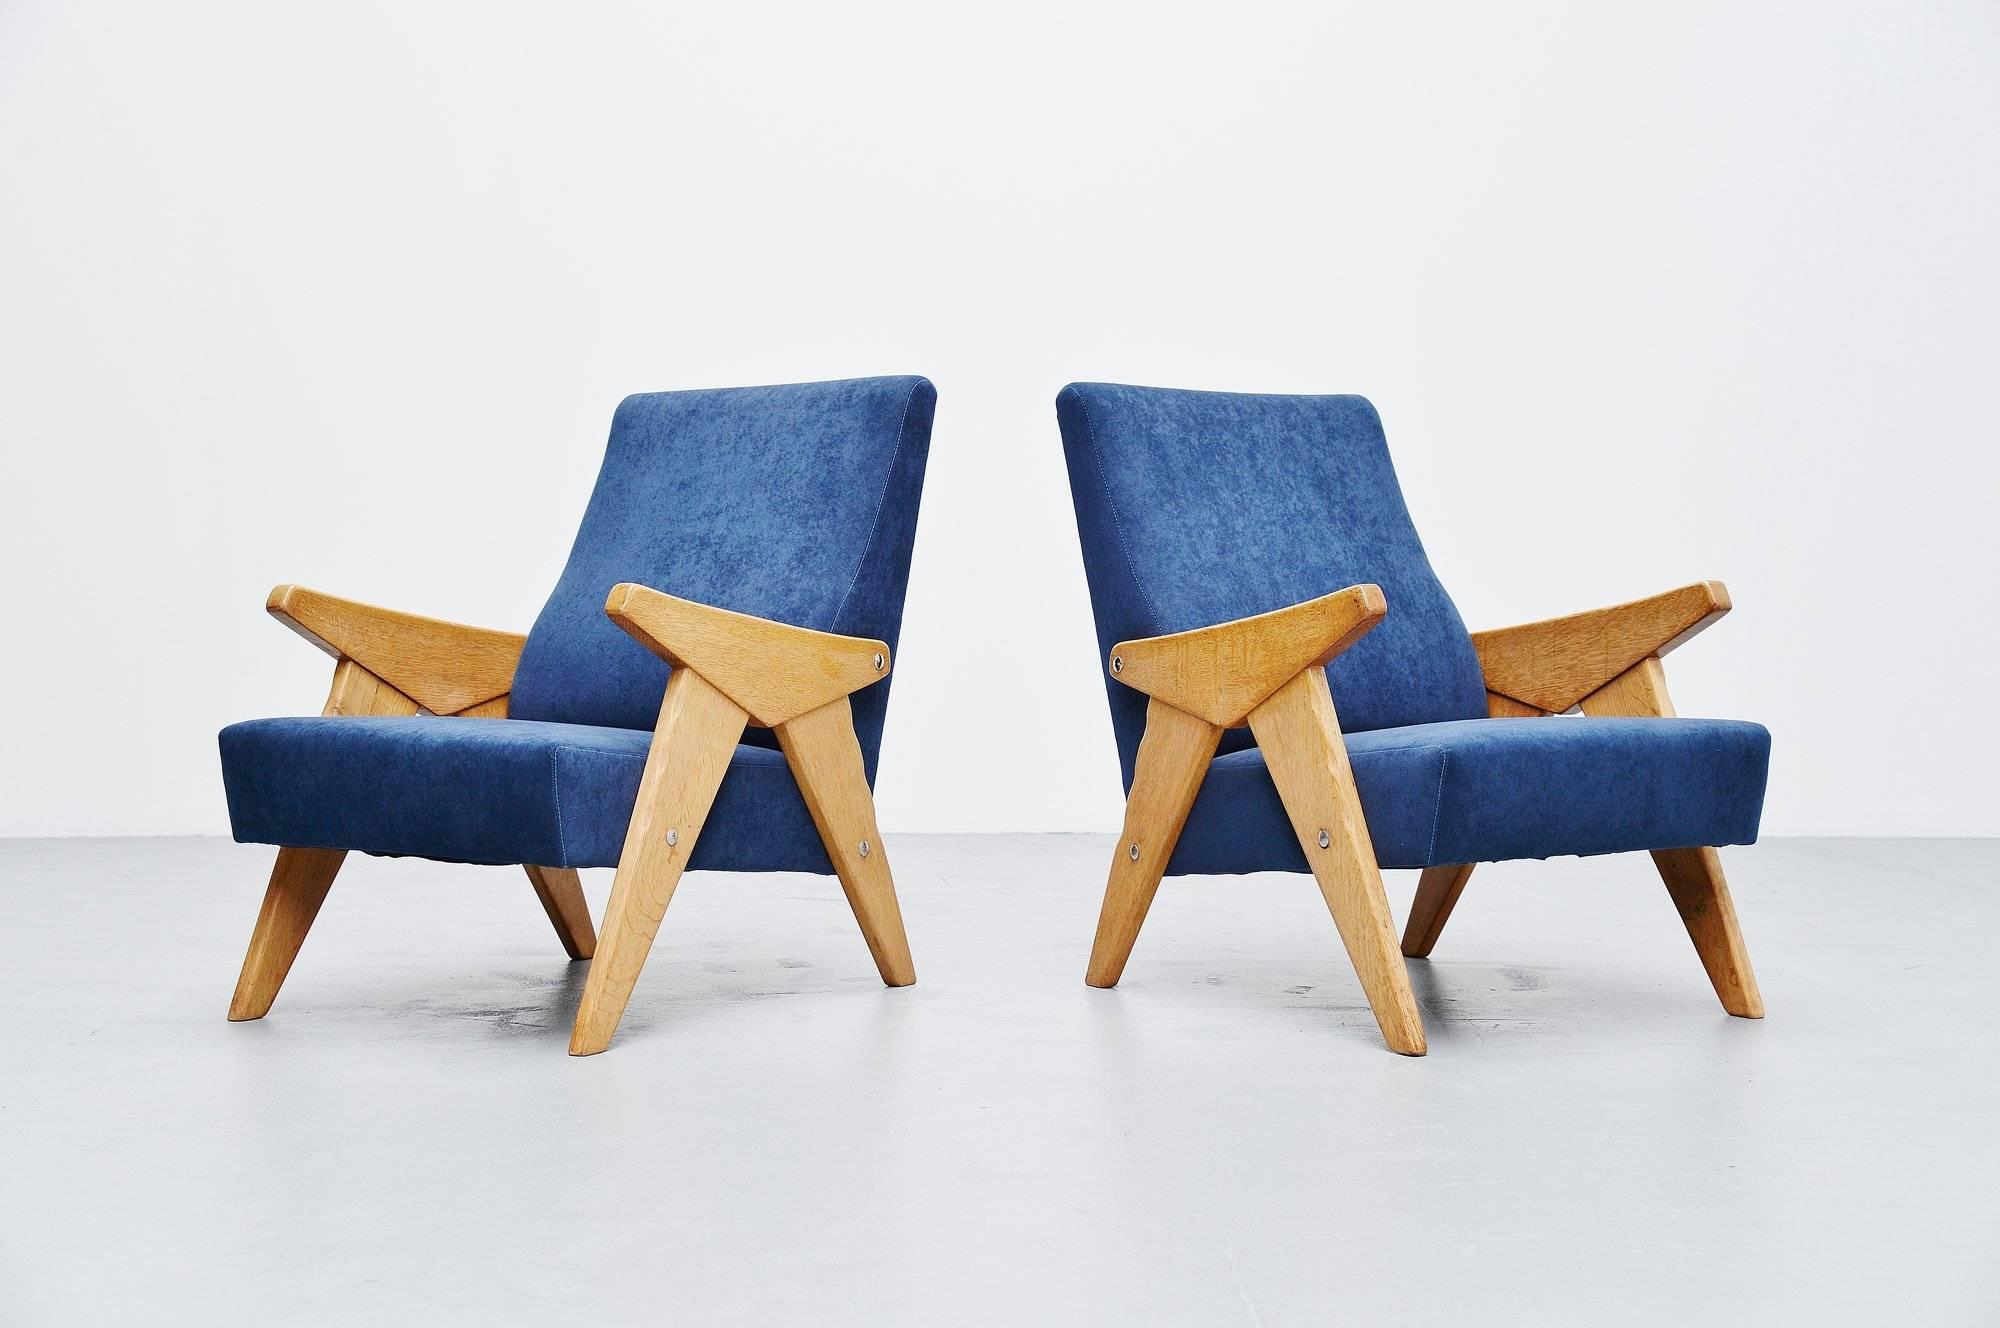 Stunning pair of lounge chairs designed and manufactured by Robert Guillerme et Jacques Chambron, France, 1960. The chairs have a solid oak wooden frame and newly upholstered velvet seats. Very nice looking and comfortable lounge chairs. Would adapt